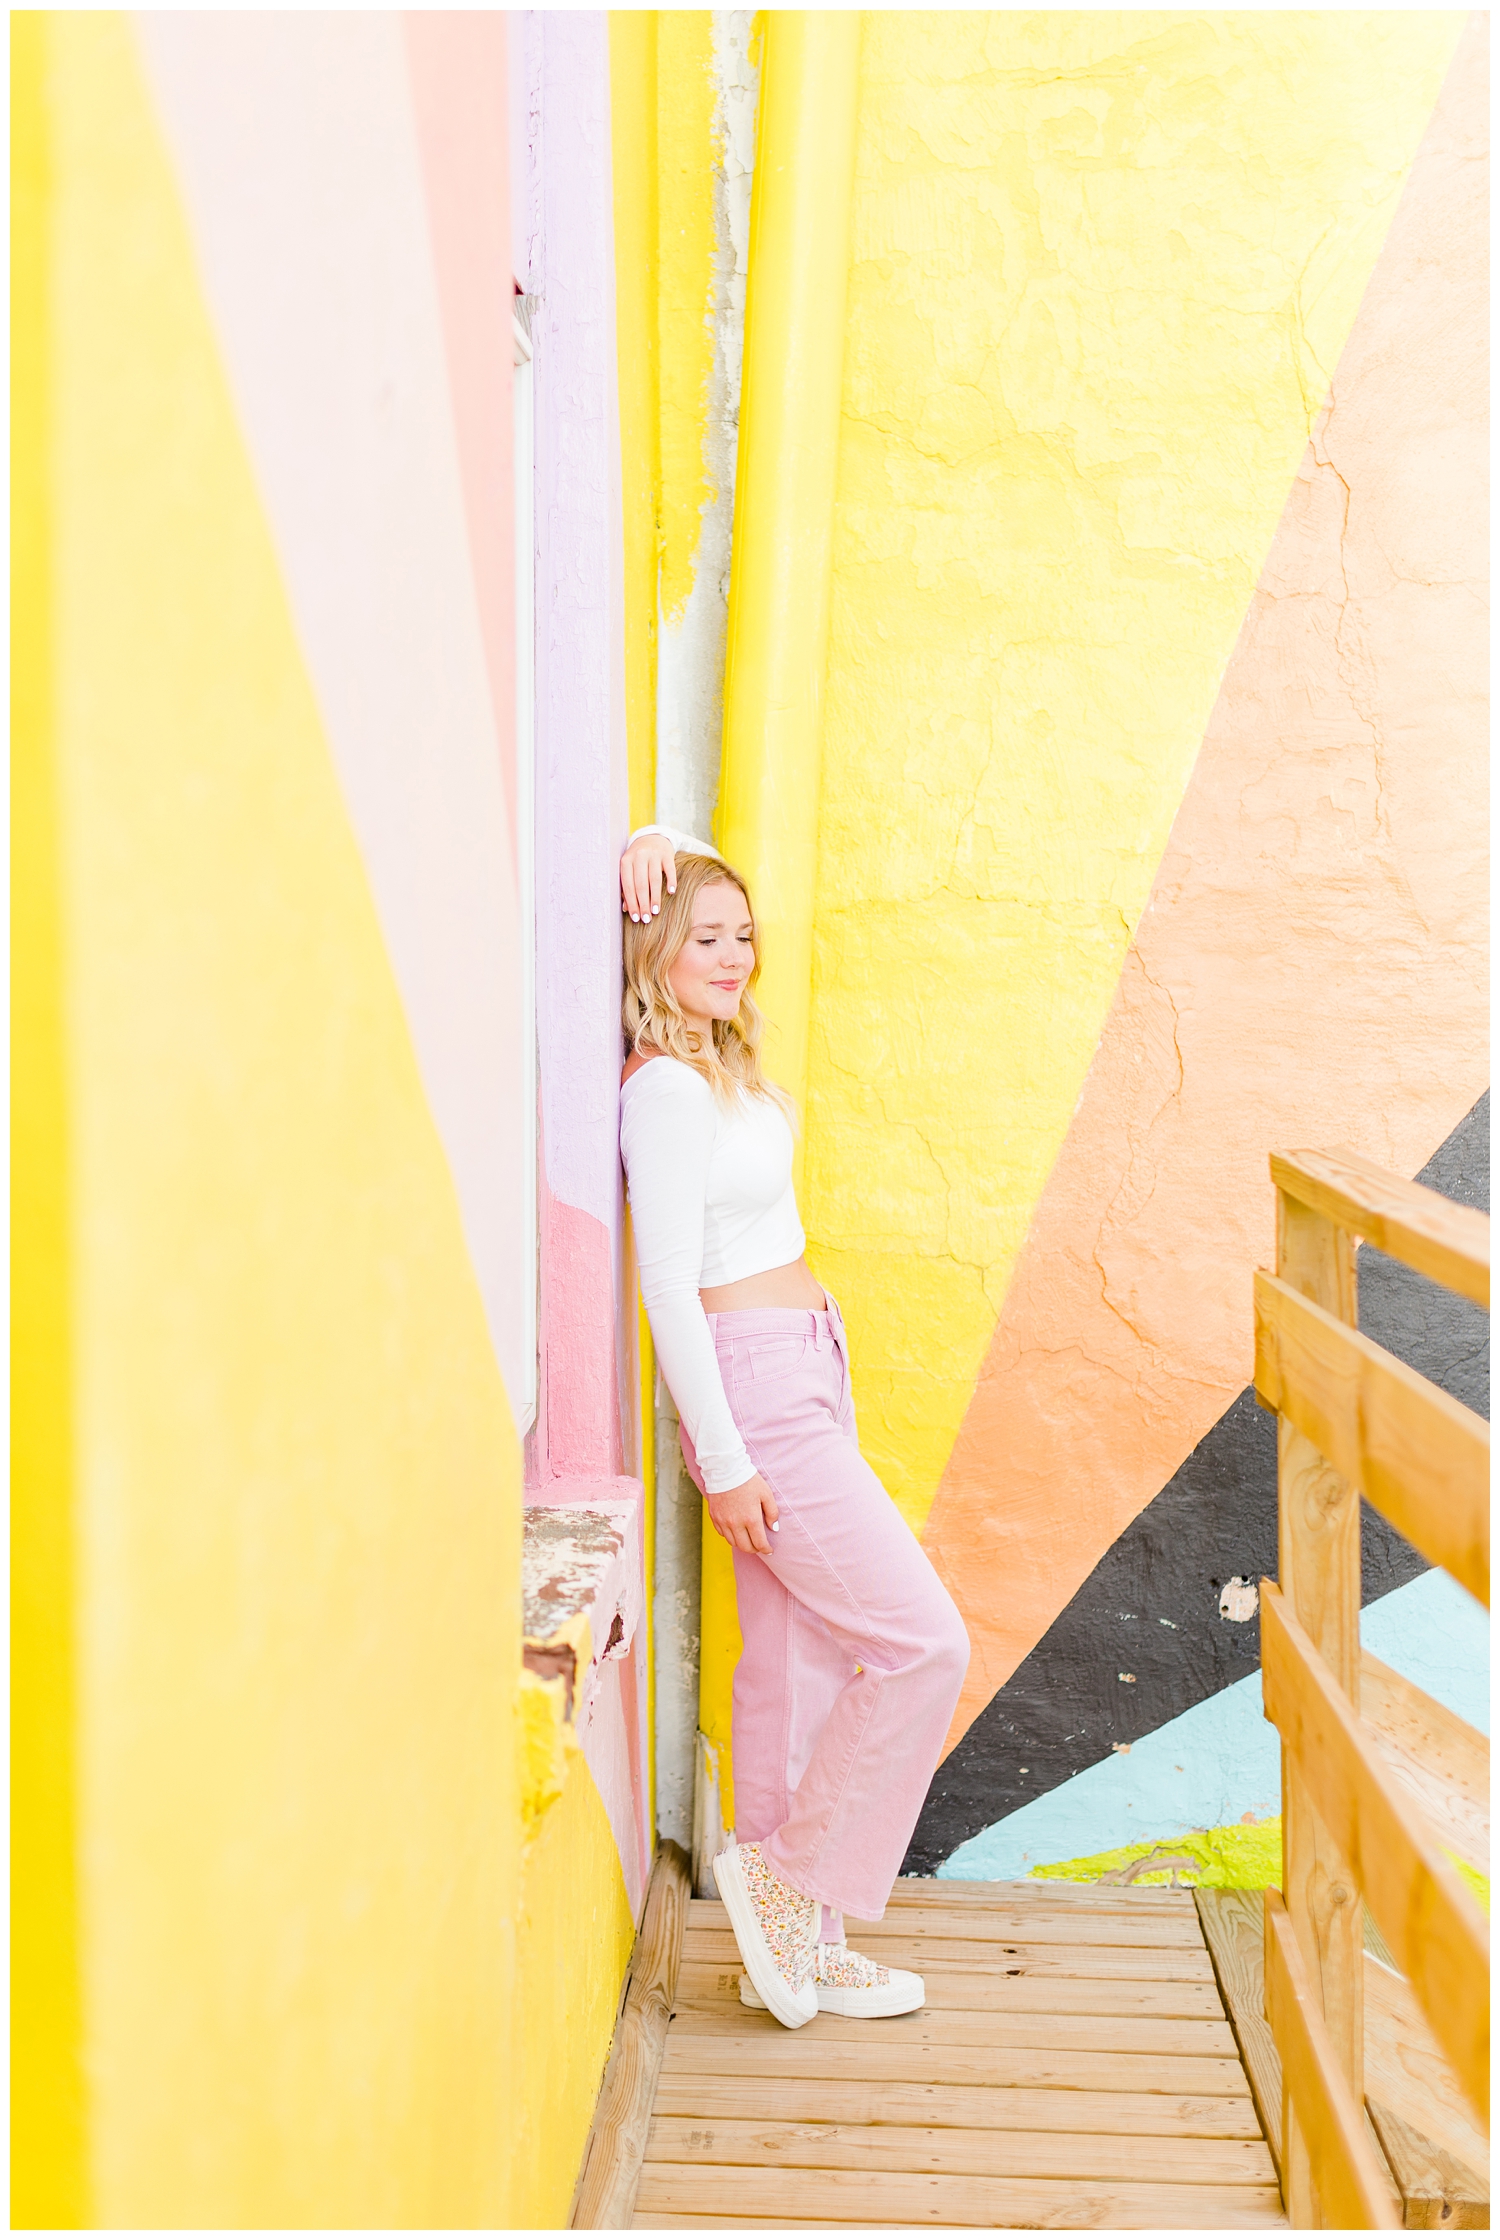 Cassie leans on a build featuring a colorful mural in downtown Algona, IA | CB Studio